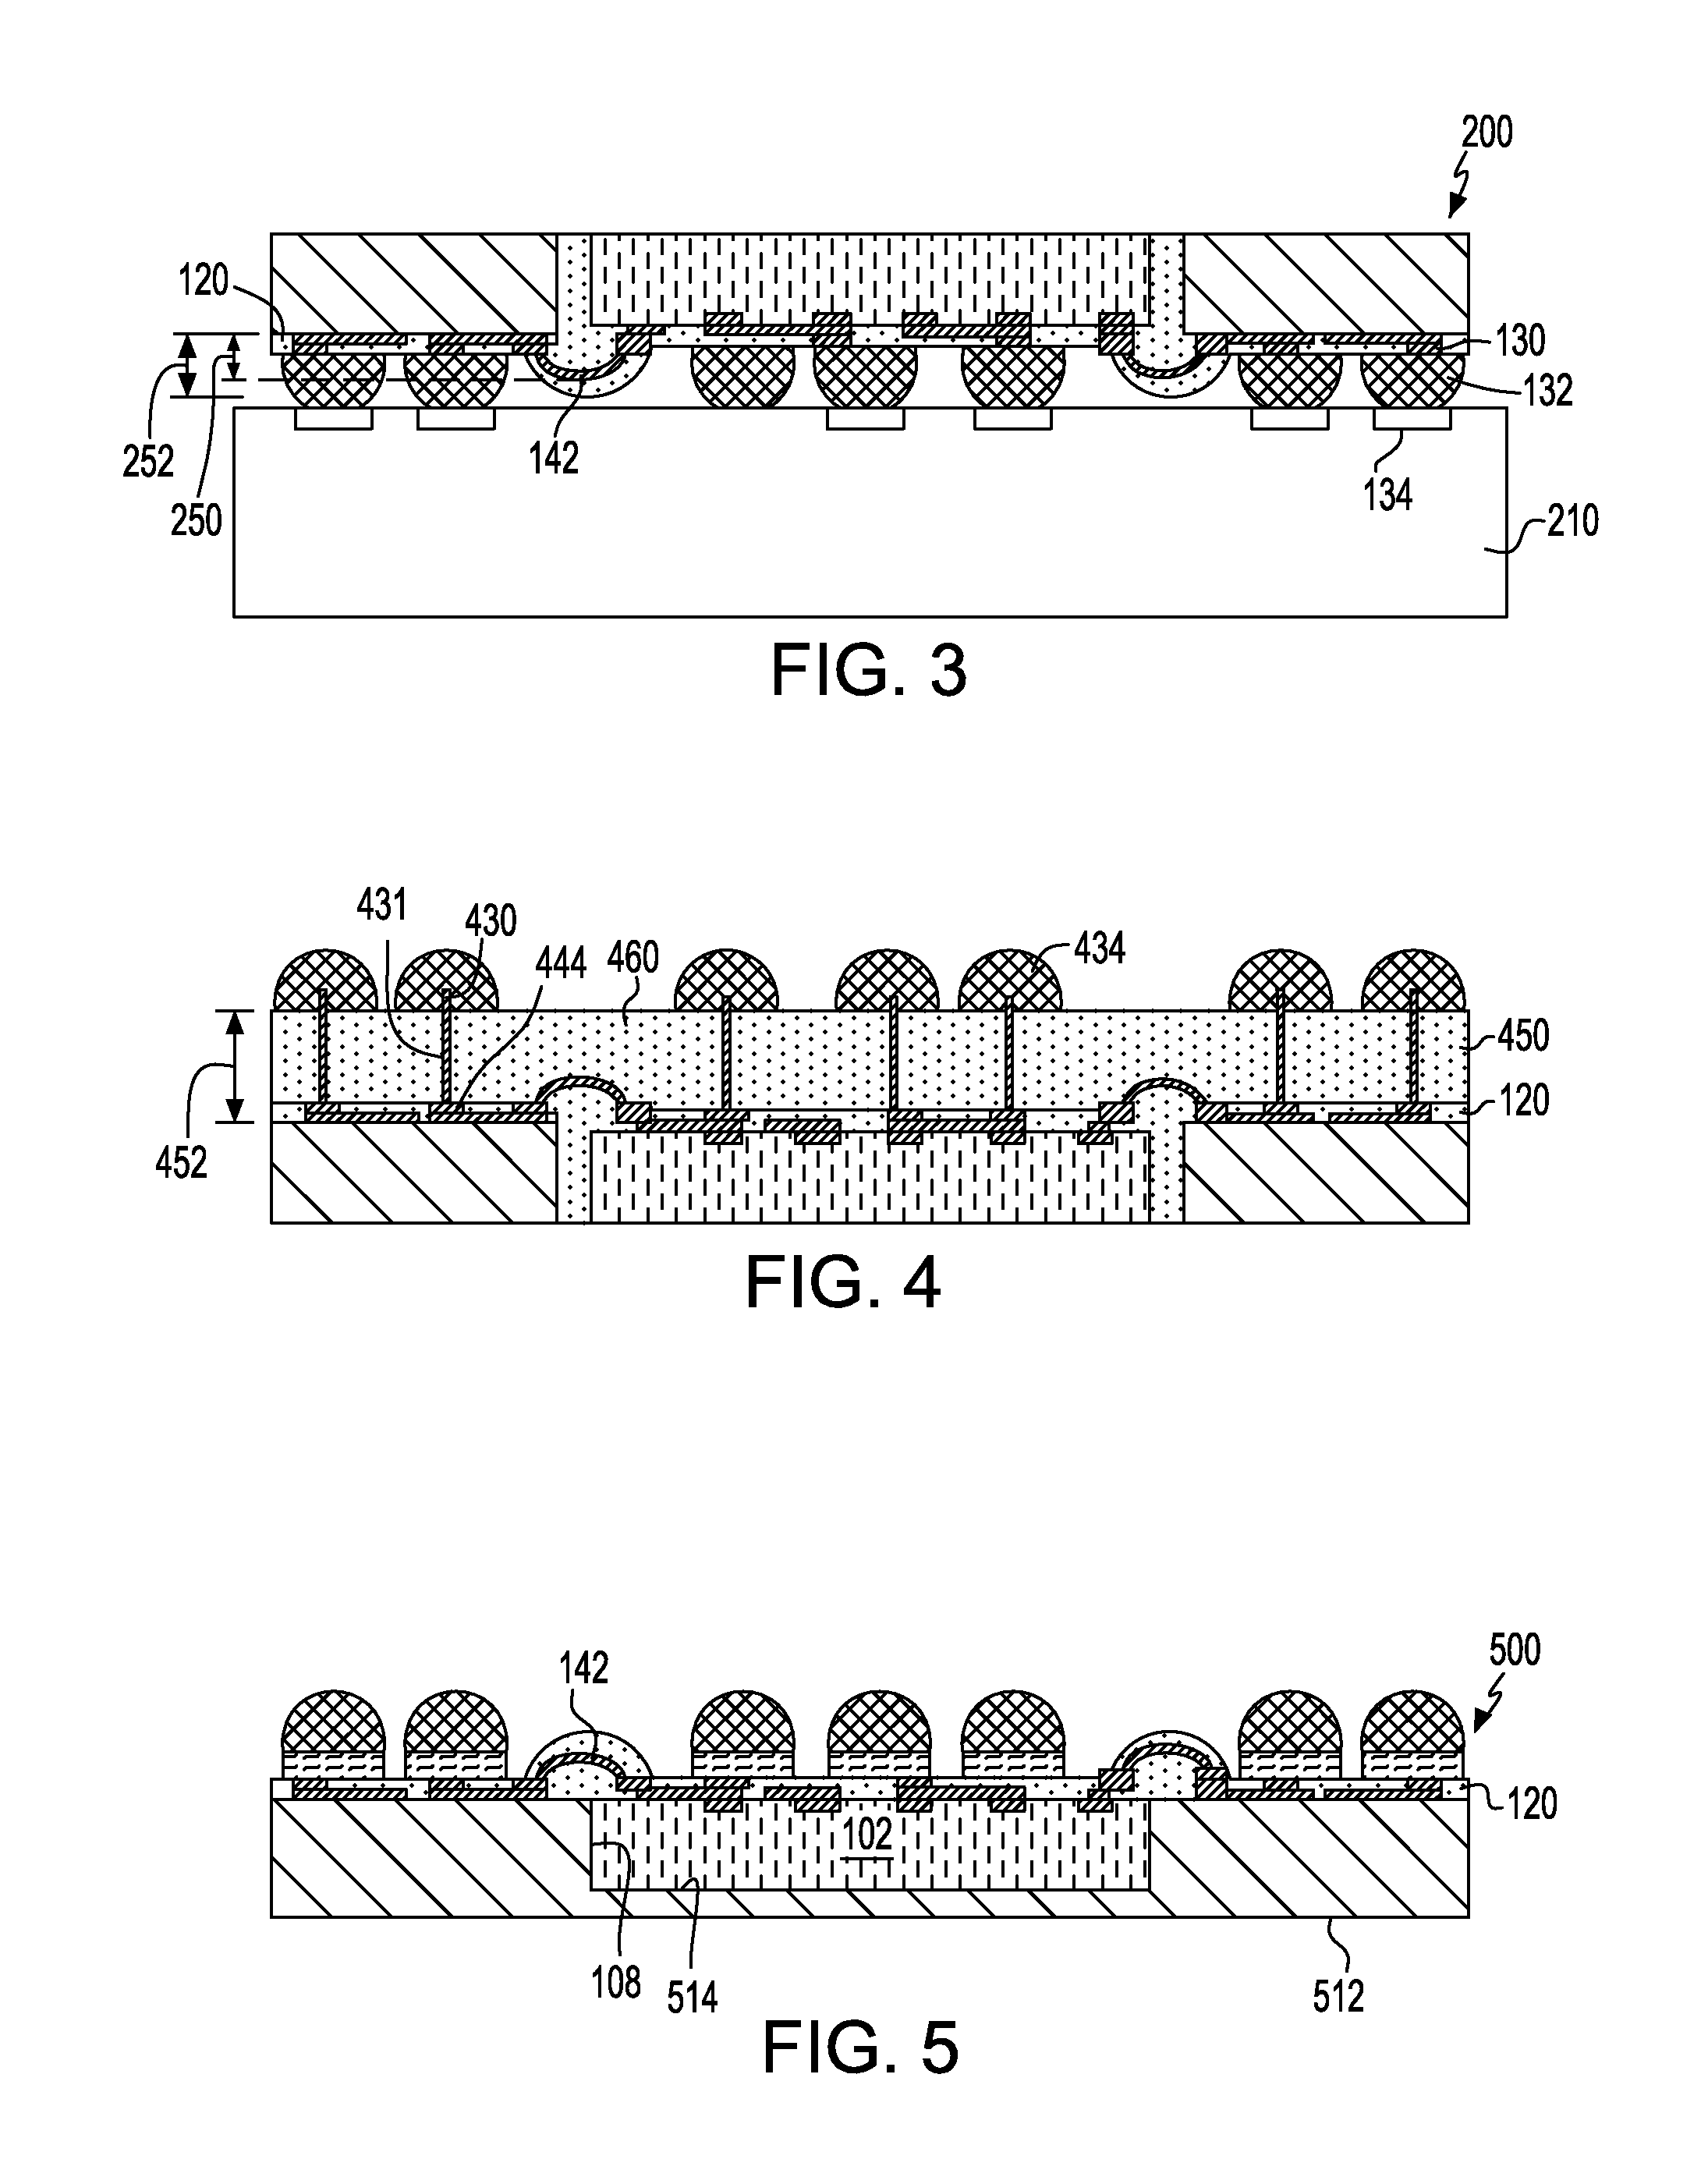 Wafer level packages with mechanically decoupled fan-in and fan-out areas